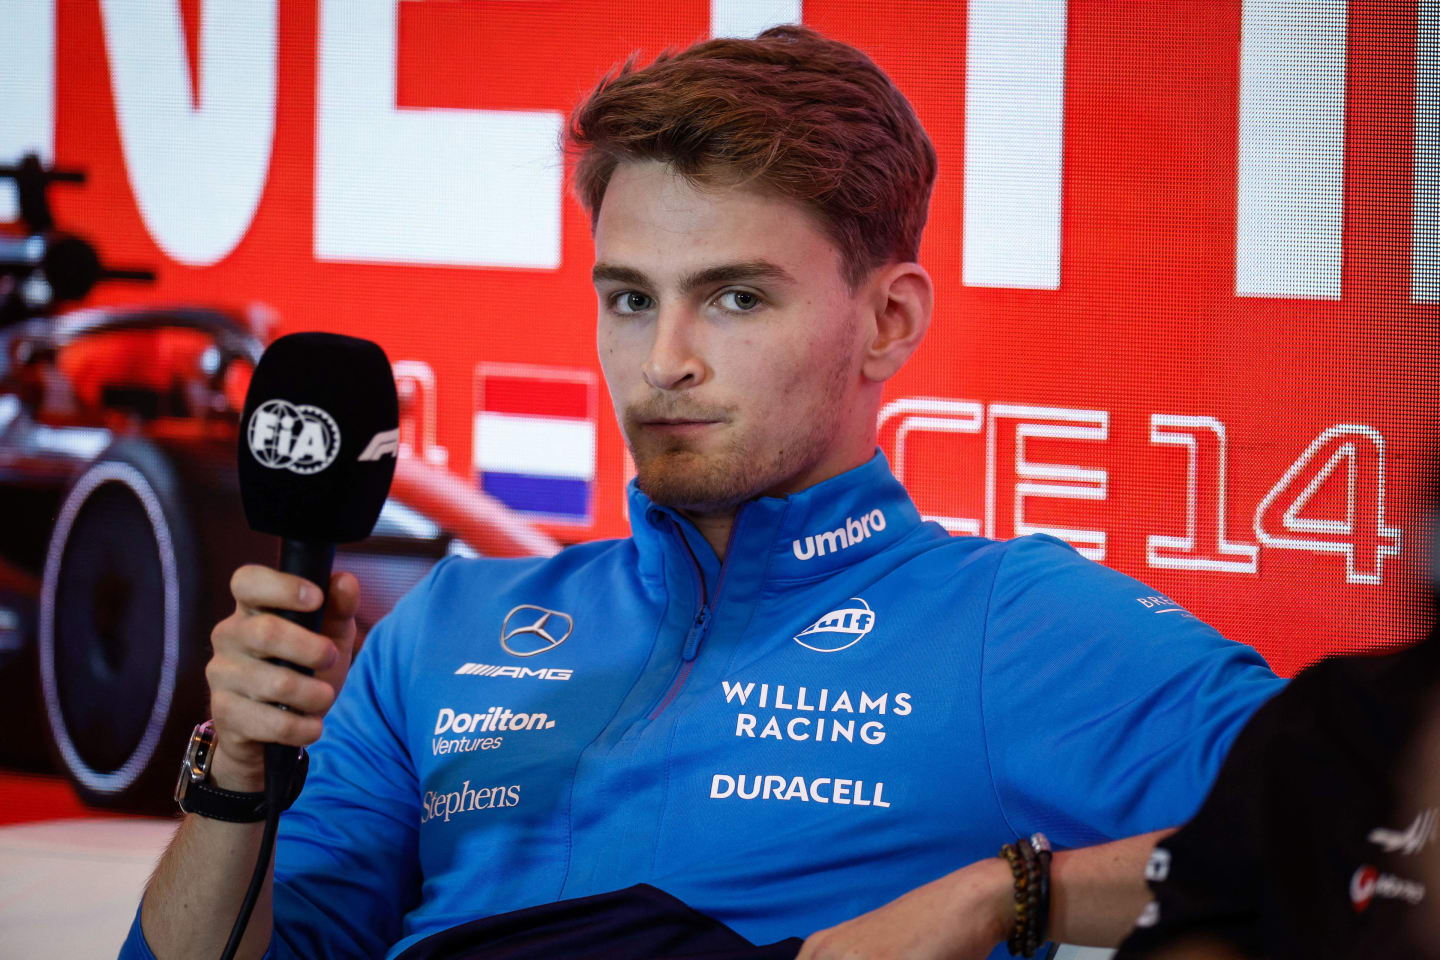 Williams' US driver Logan Sargeant looks on during a press conference ahead of the Dutch Formula One Grand Prix, in the coastal town of Zandvoort on August 24, 2023. The 2023 Dutch Grand Prix will take place on August 27, 2023. (Photo by Simon Wohlfahrt / AFP) (Photo by SIMON WOHLFAHRT/AFP via Getty Images)